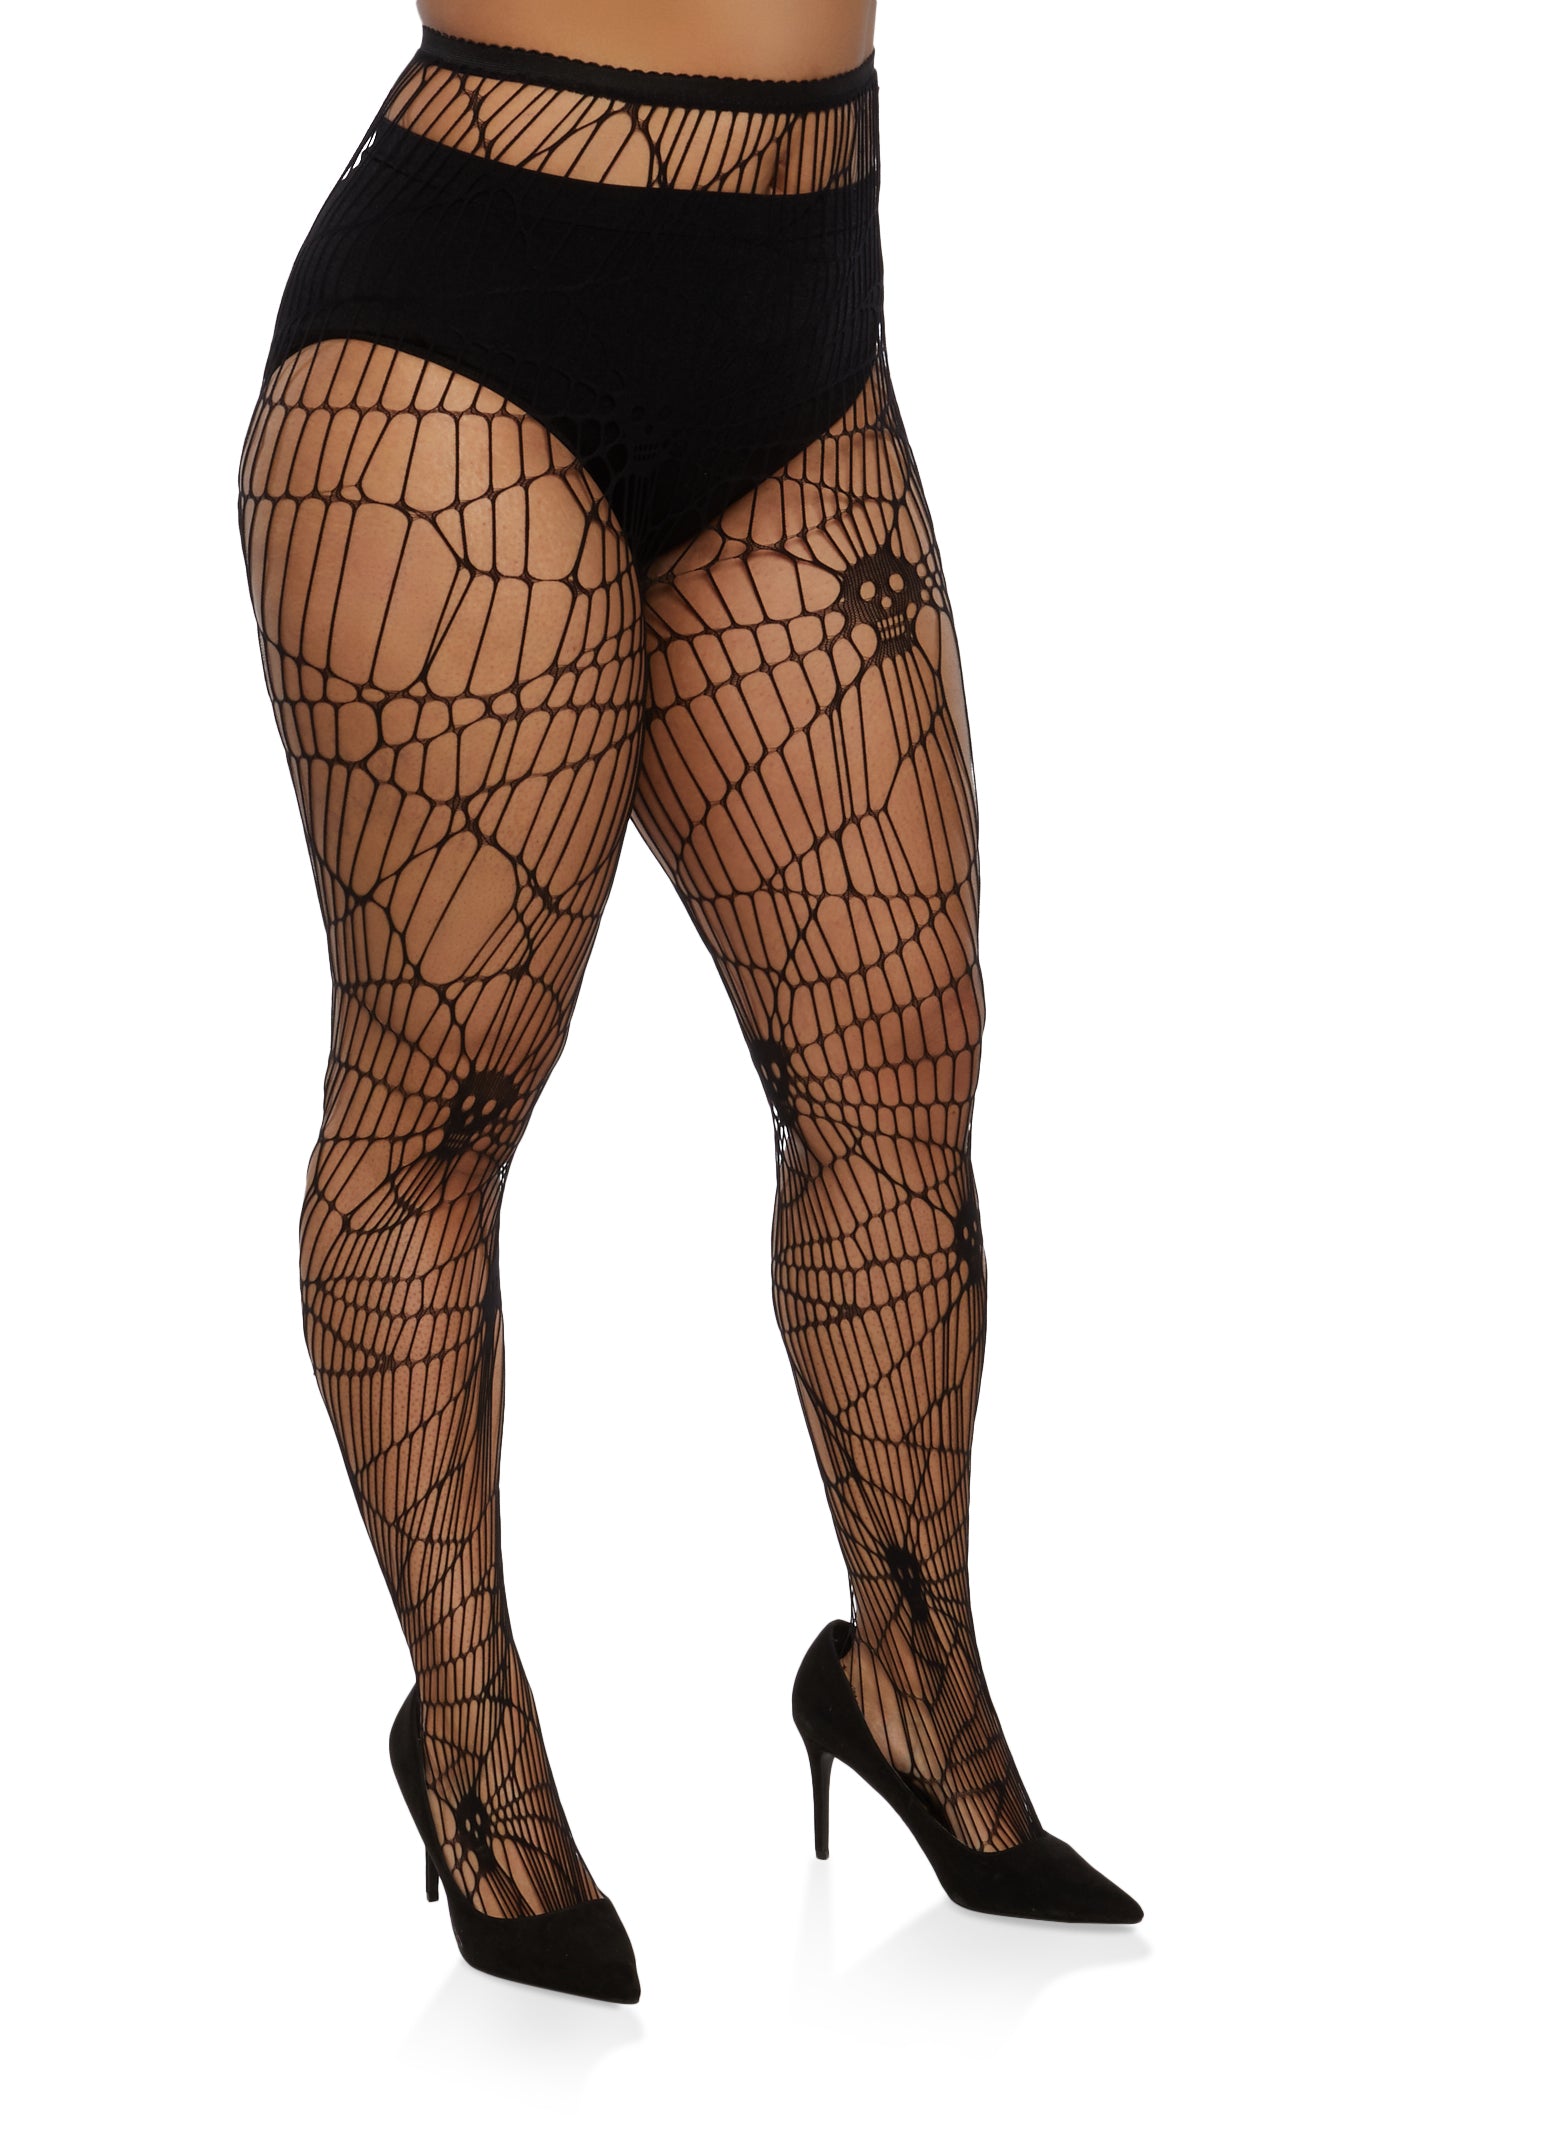 Plus Size Fishnet Patterned Tights